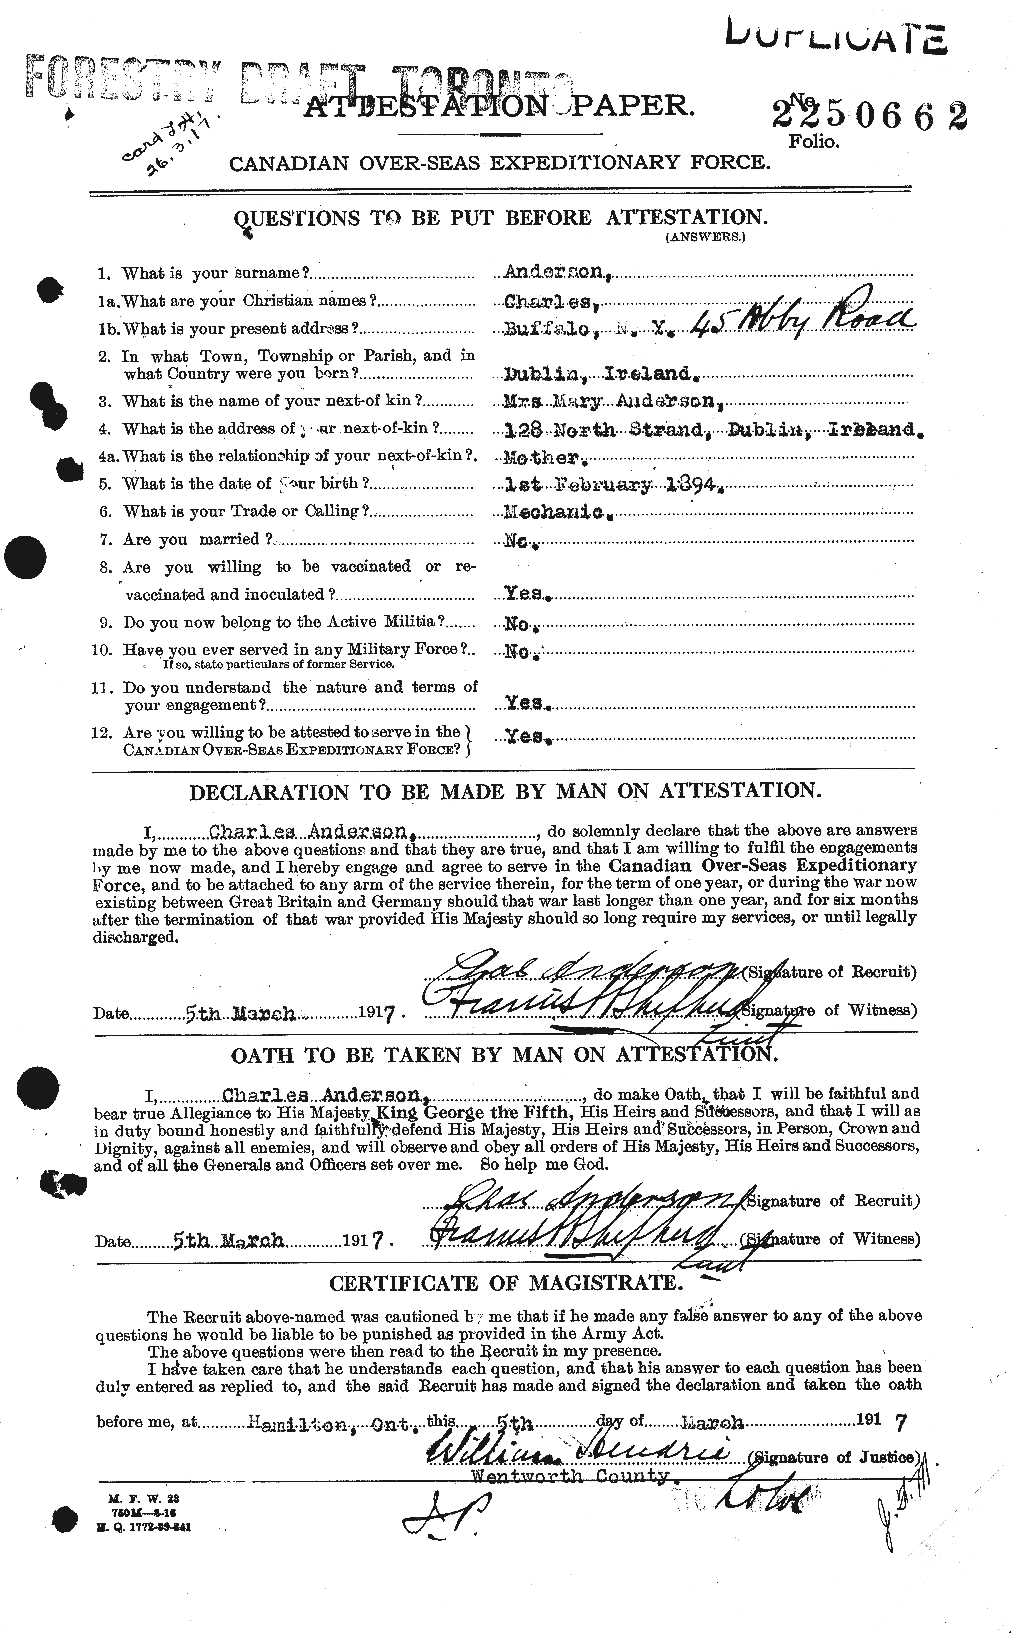 Personnel Records of the First World War - CEF 209265a